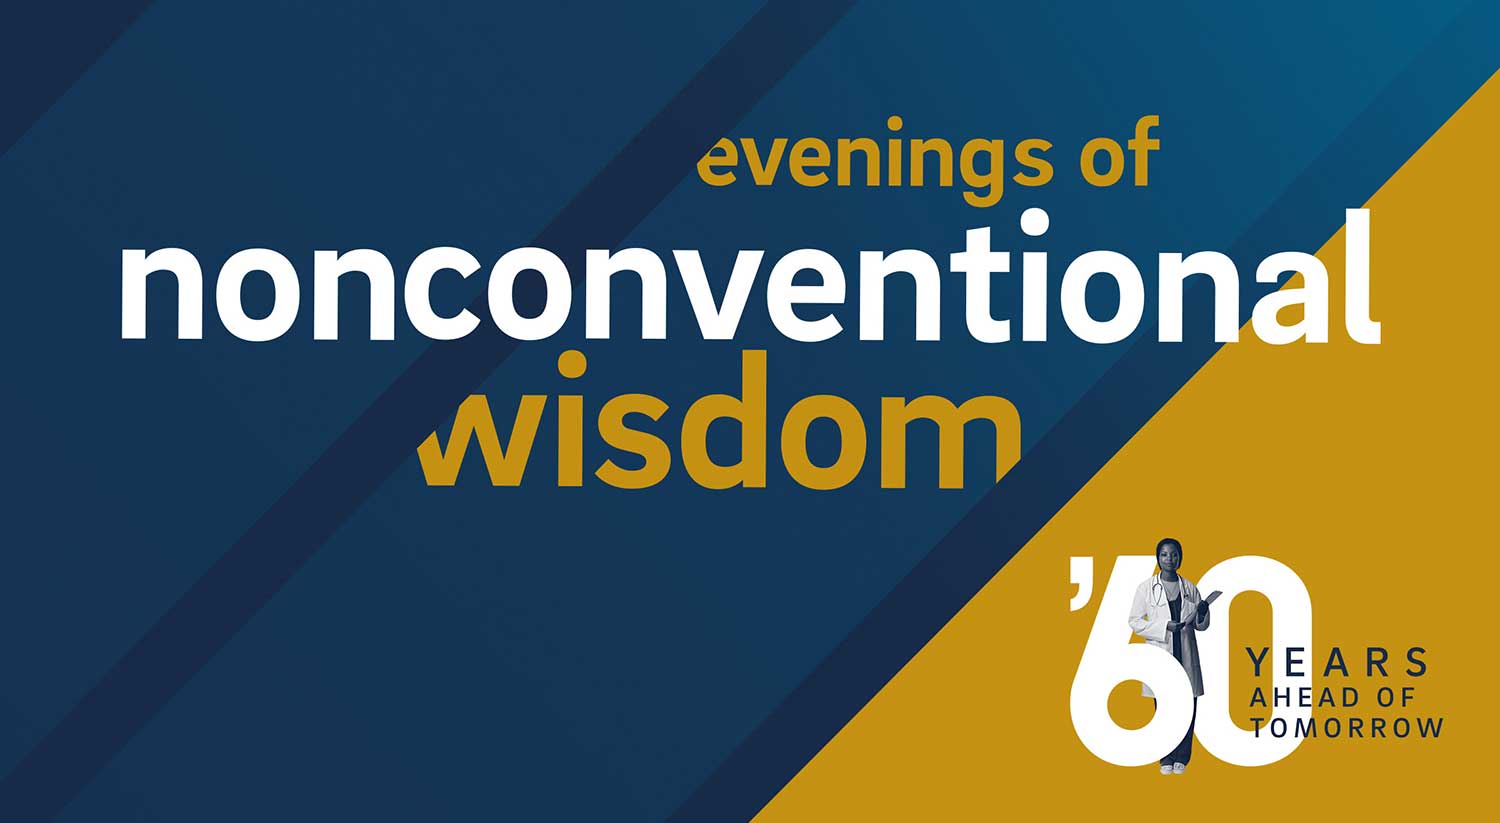 Evenings of Nonconventional Wisdom graphic.